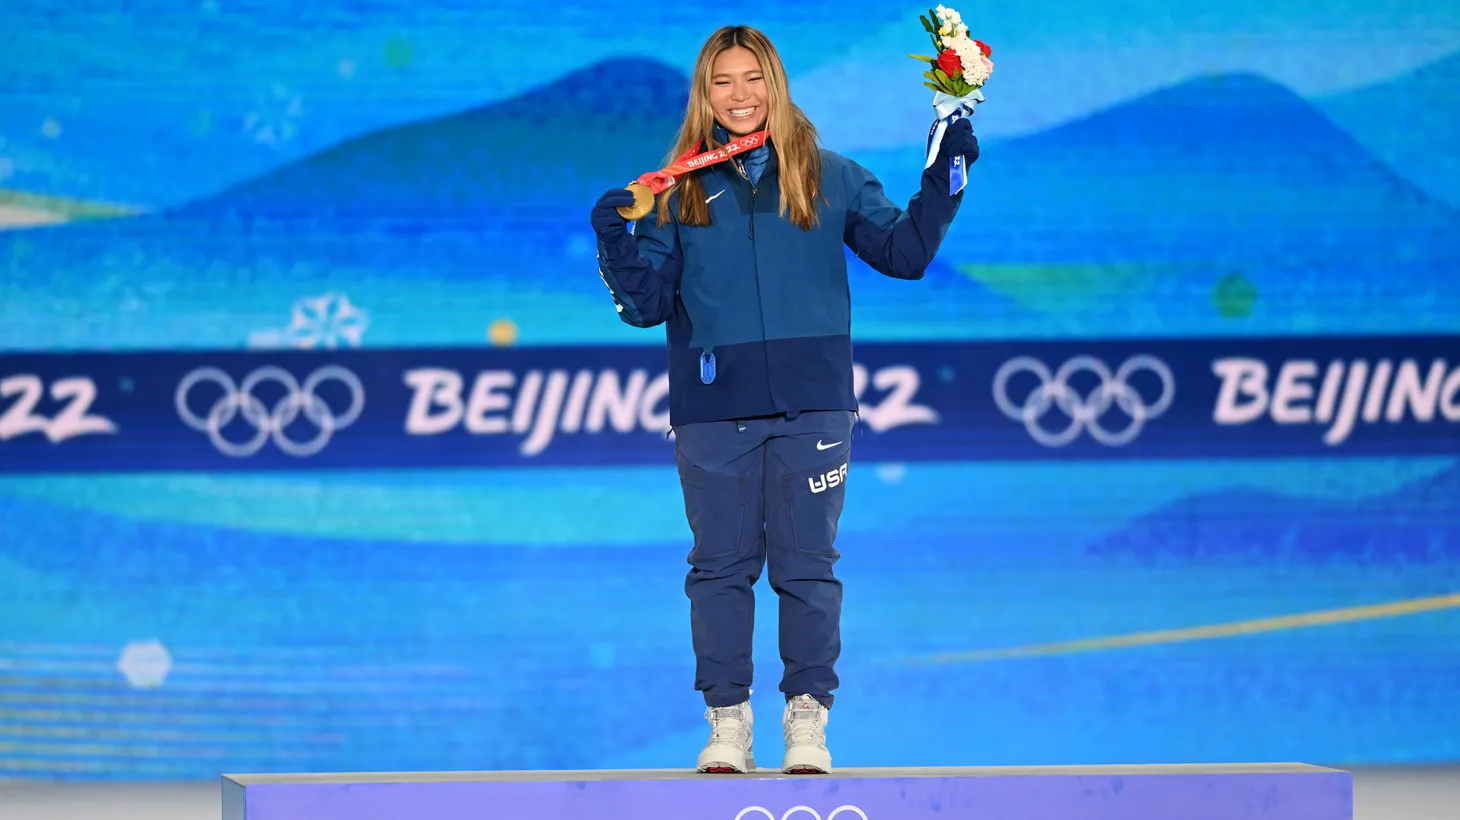 Torrance native Chloe Kim won gold for the half pipe event in snowboarding at the Beijing Winter Olympics.